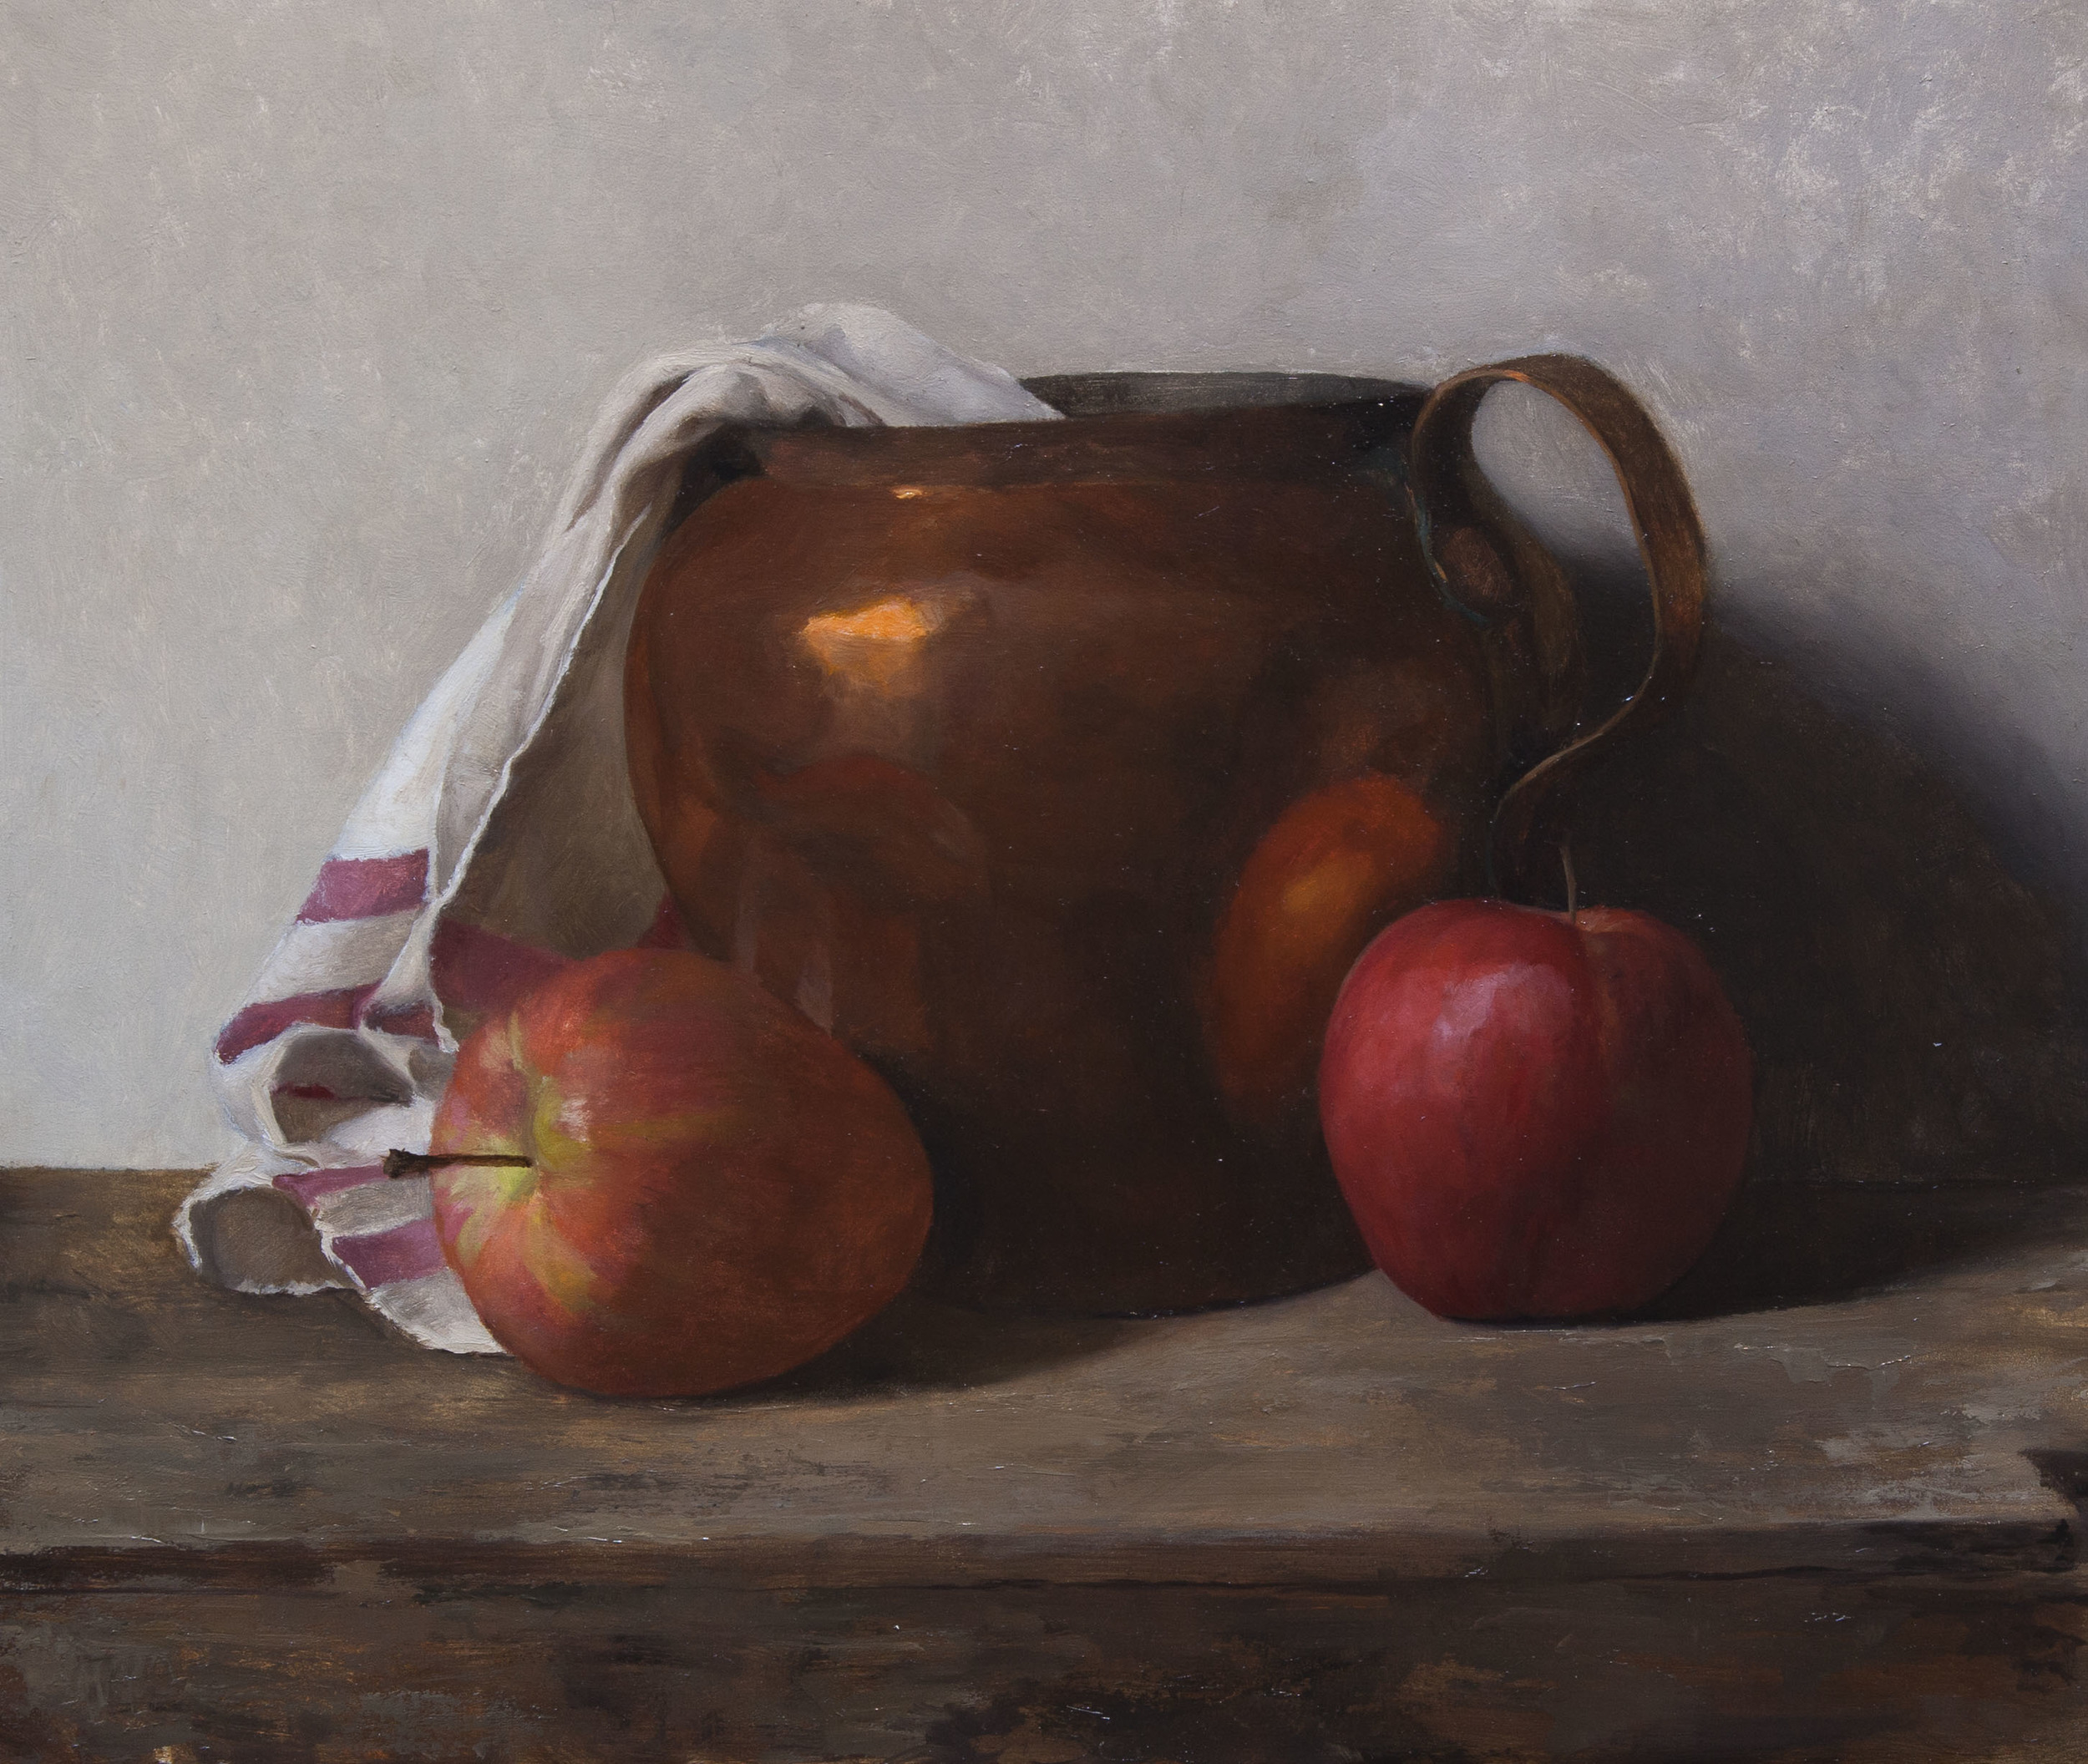  Copper Pot With Apples. 10x12. Oil on Panel 